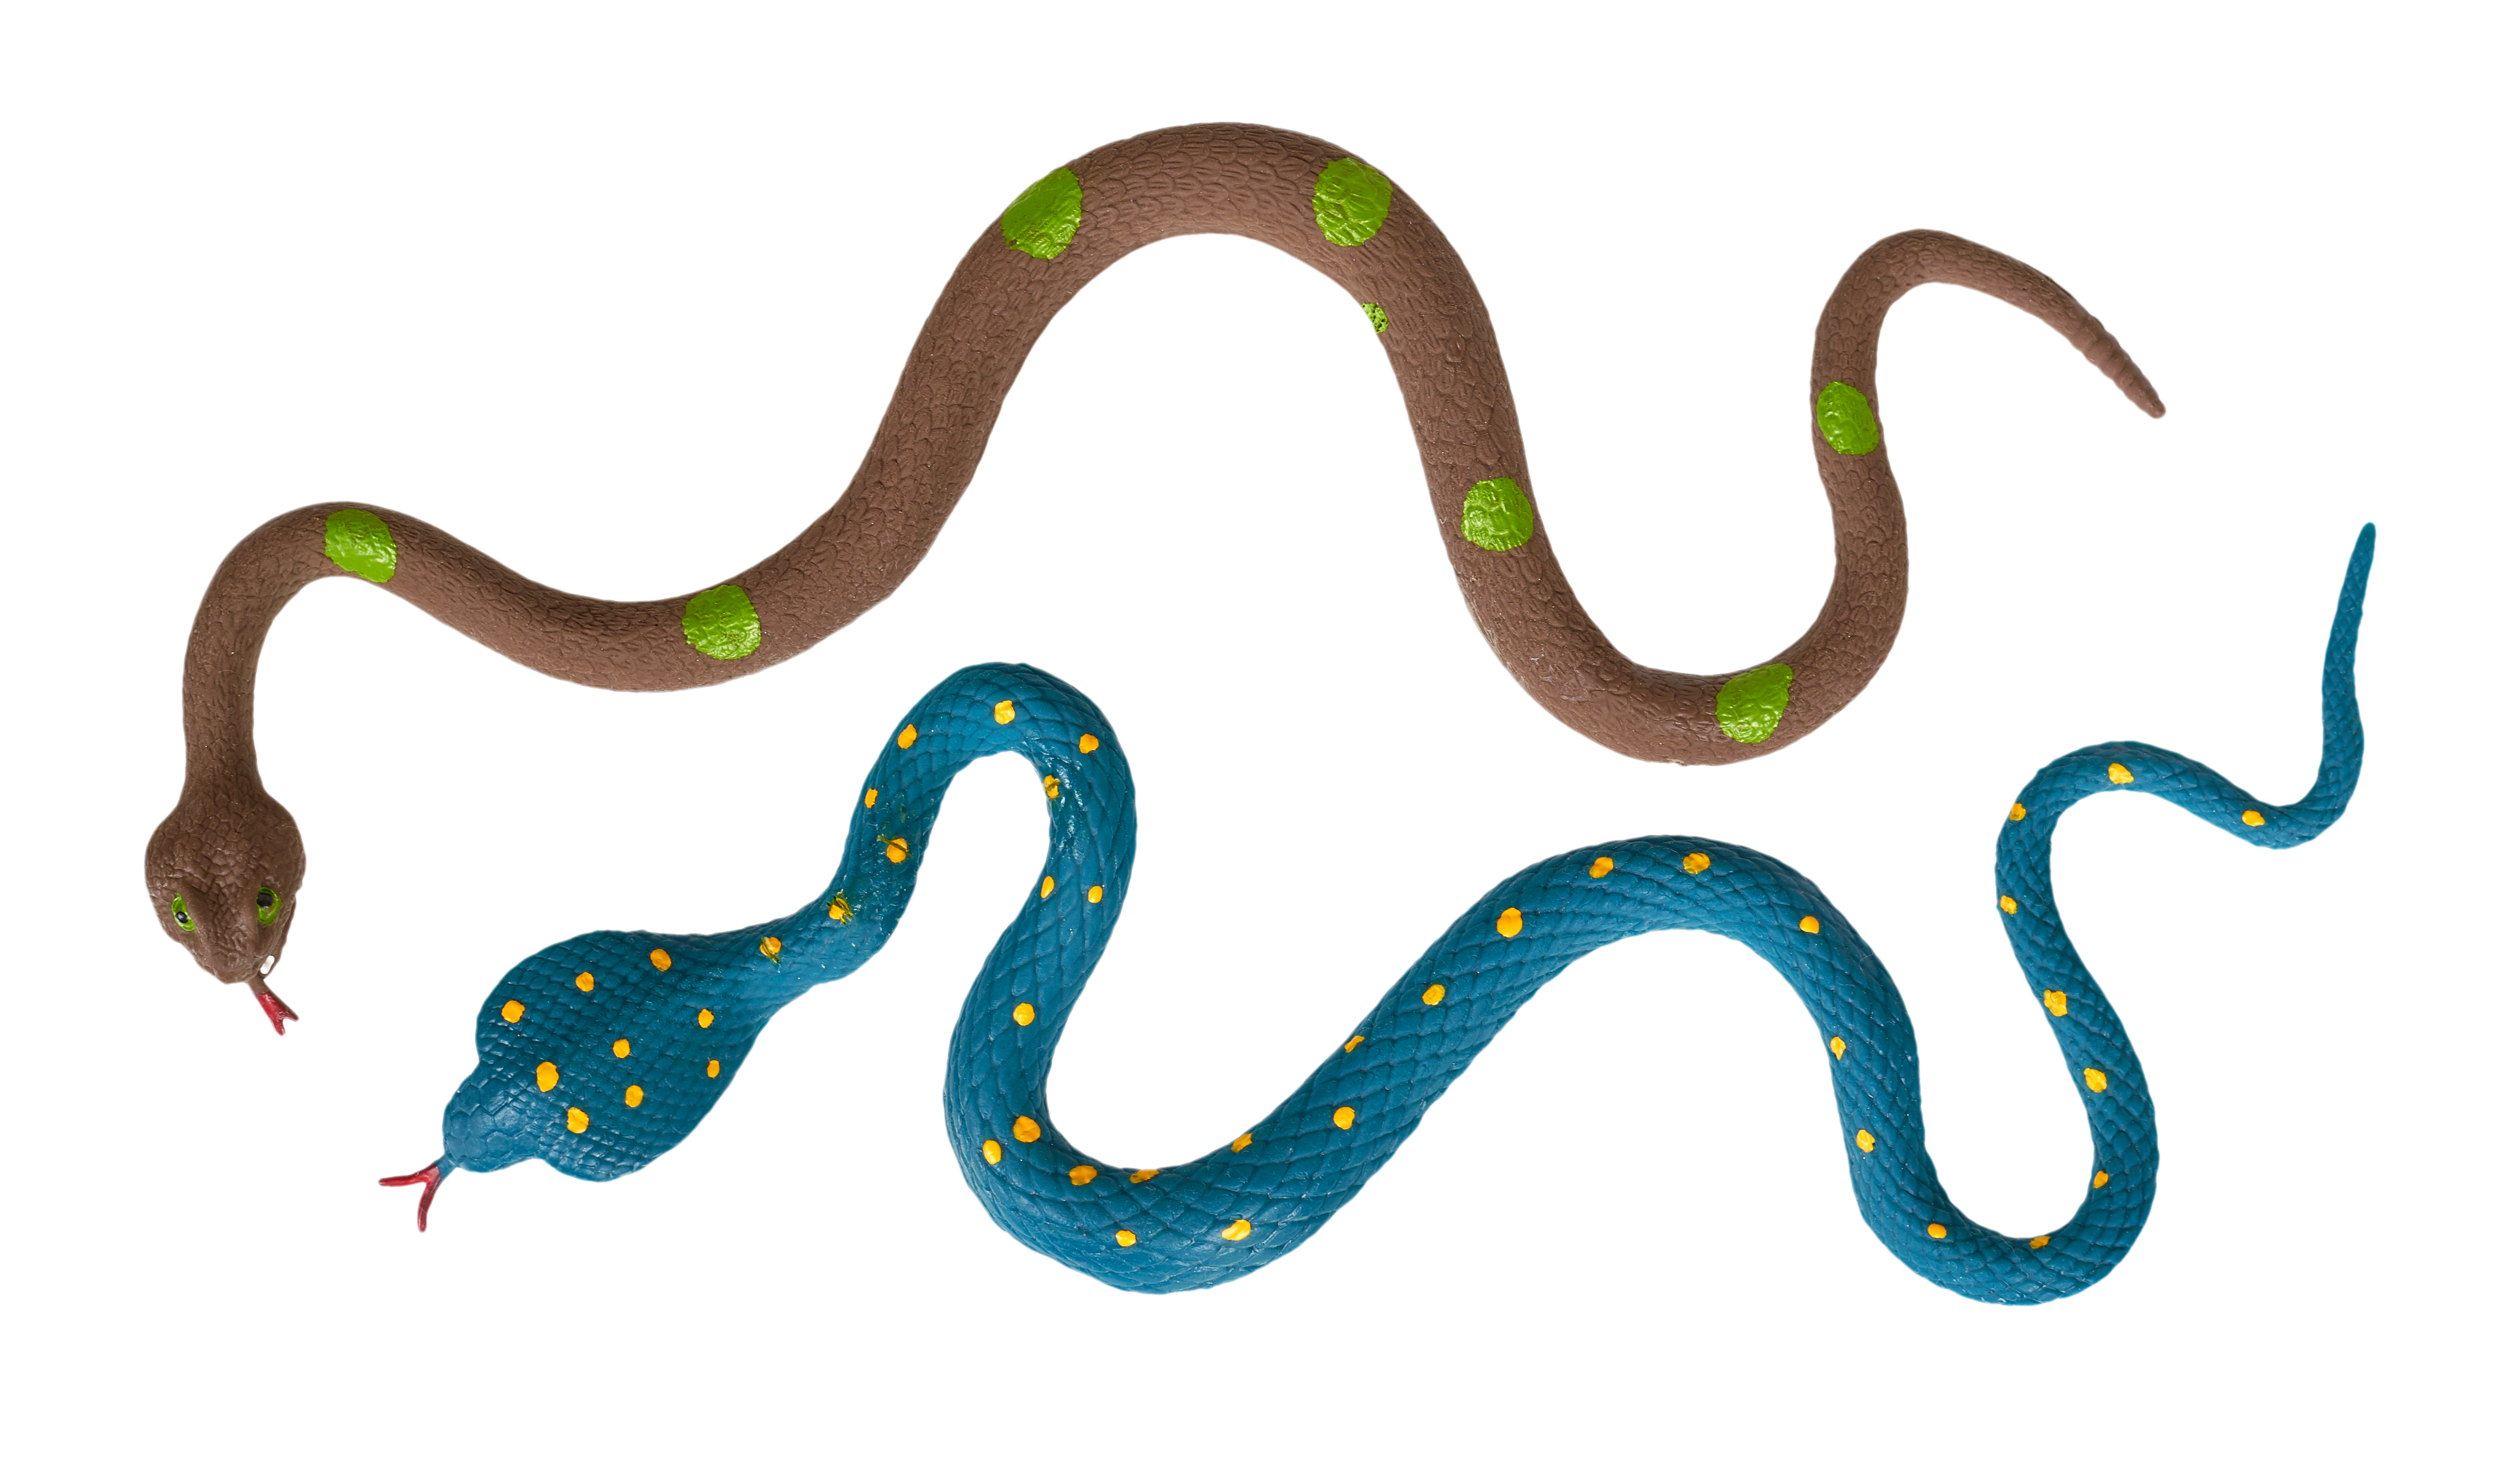 Rubber snakes